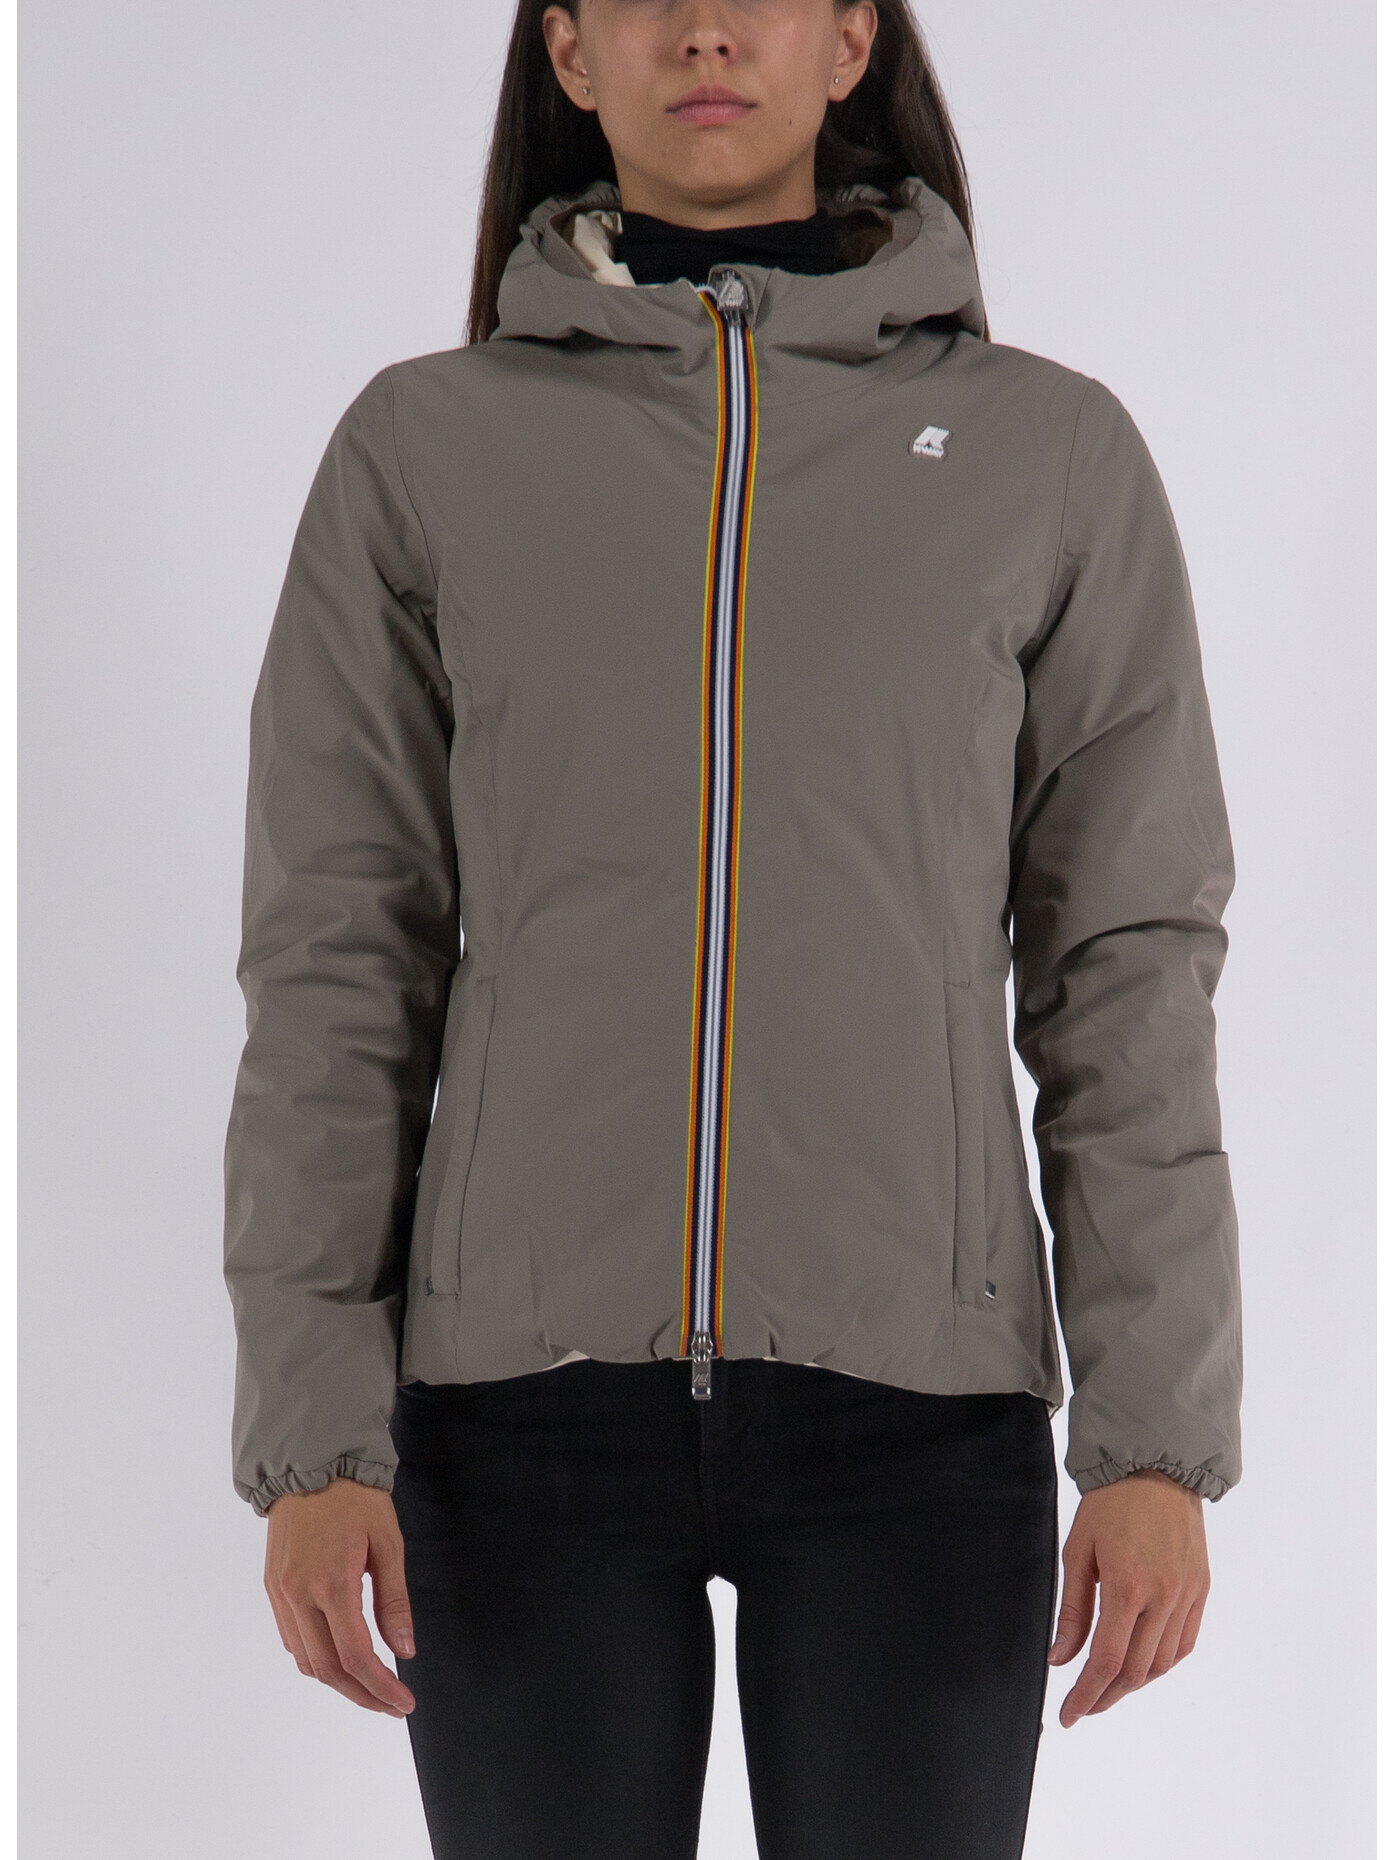 kway giacca lily warm double, donna